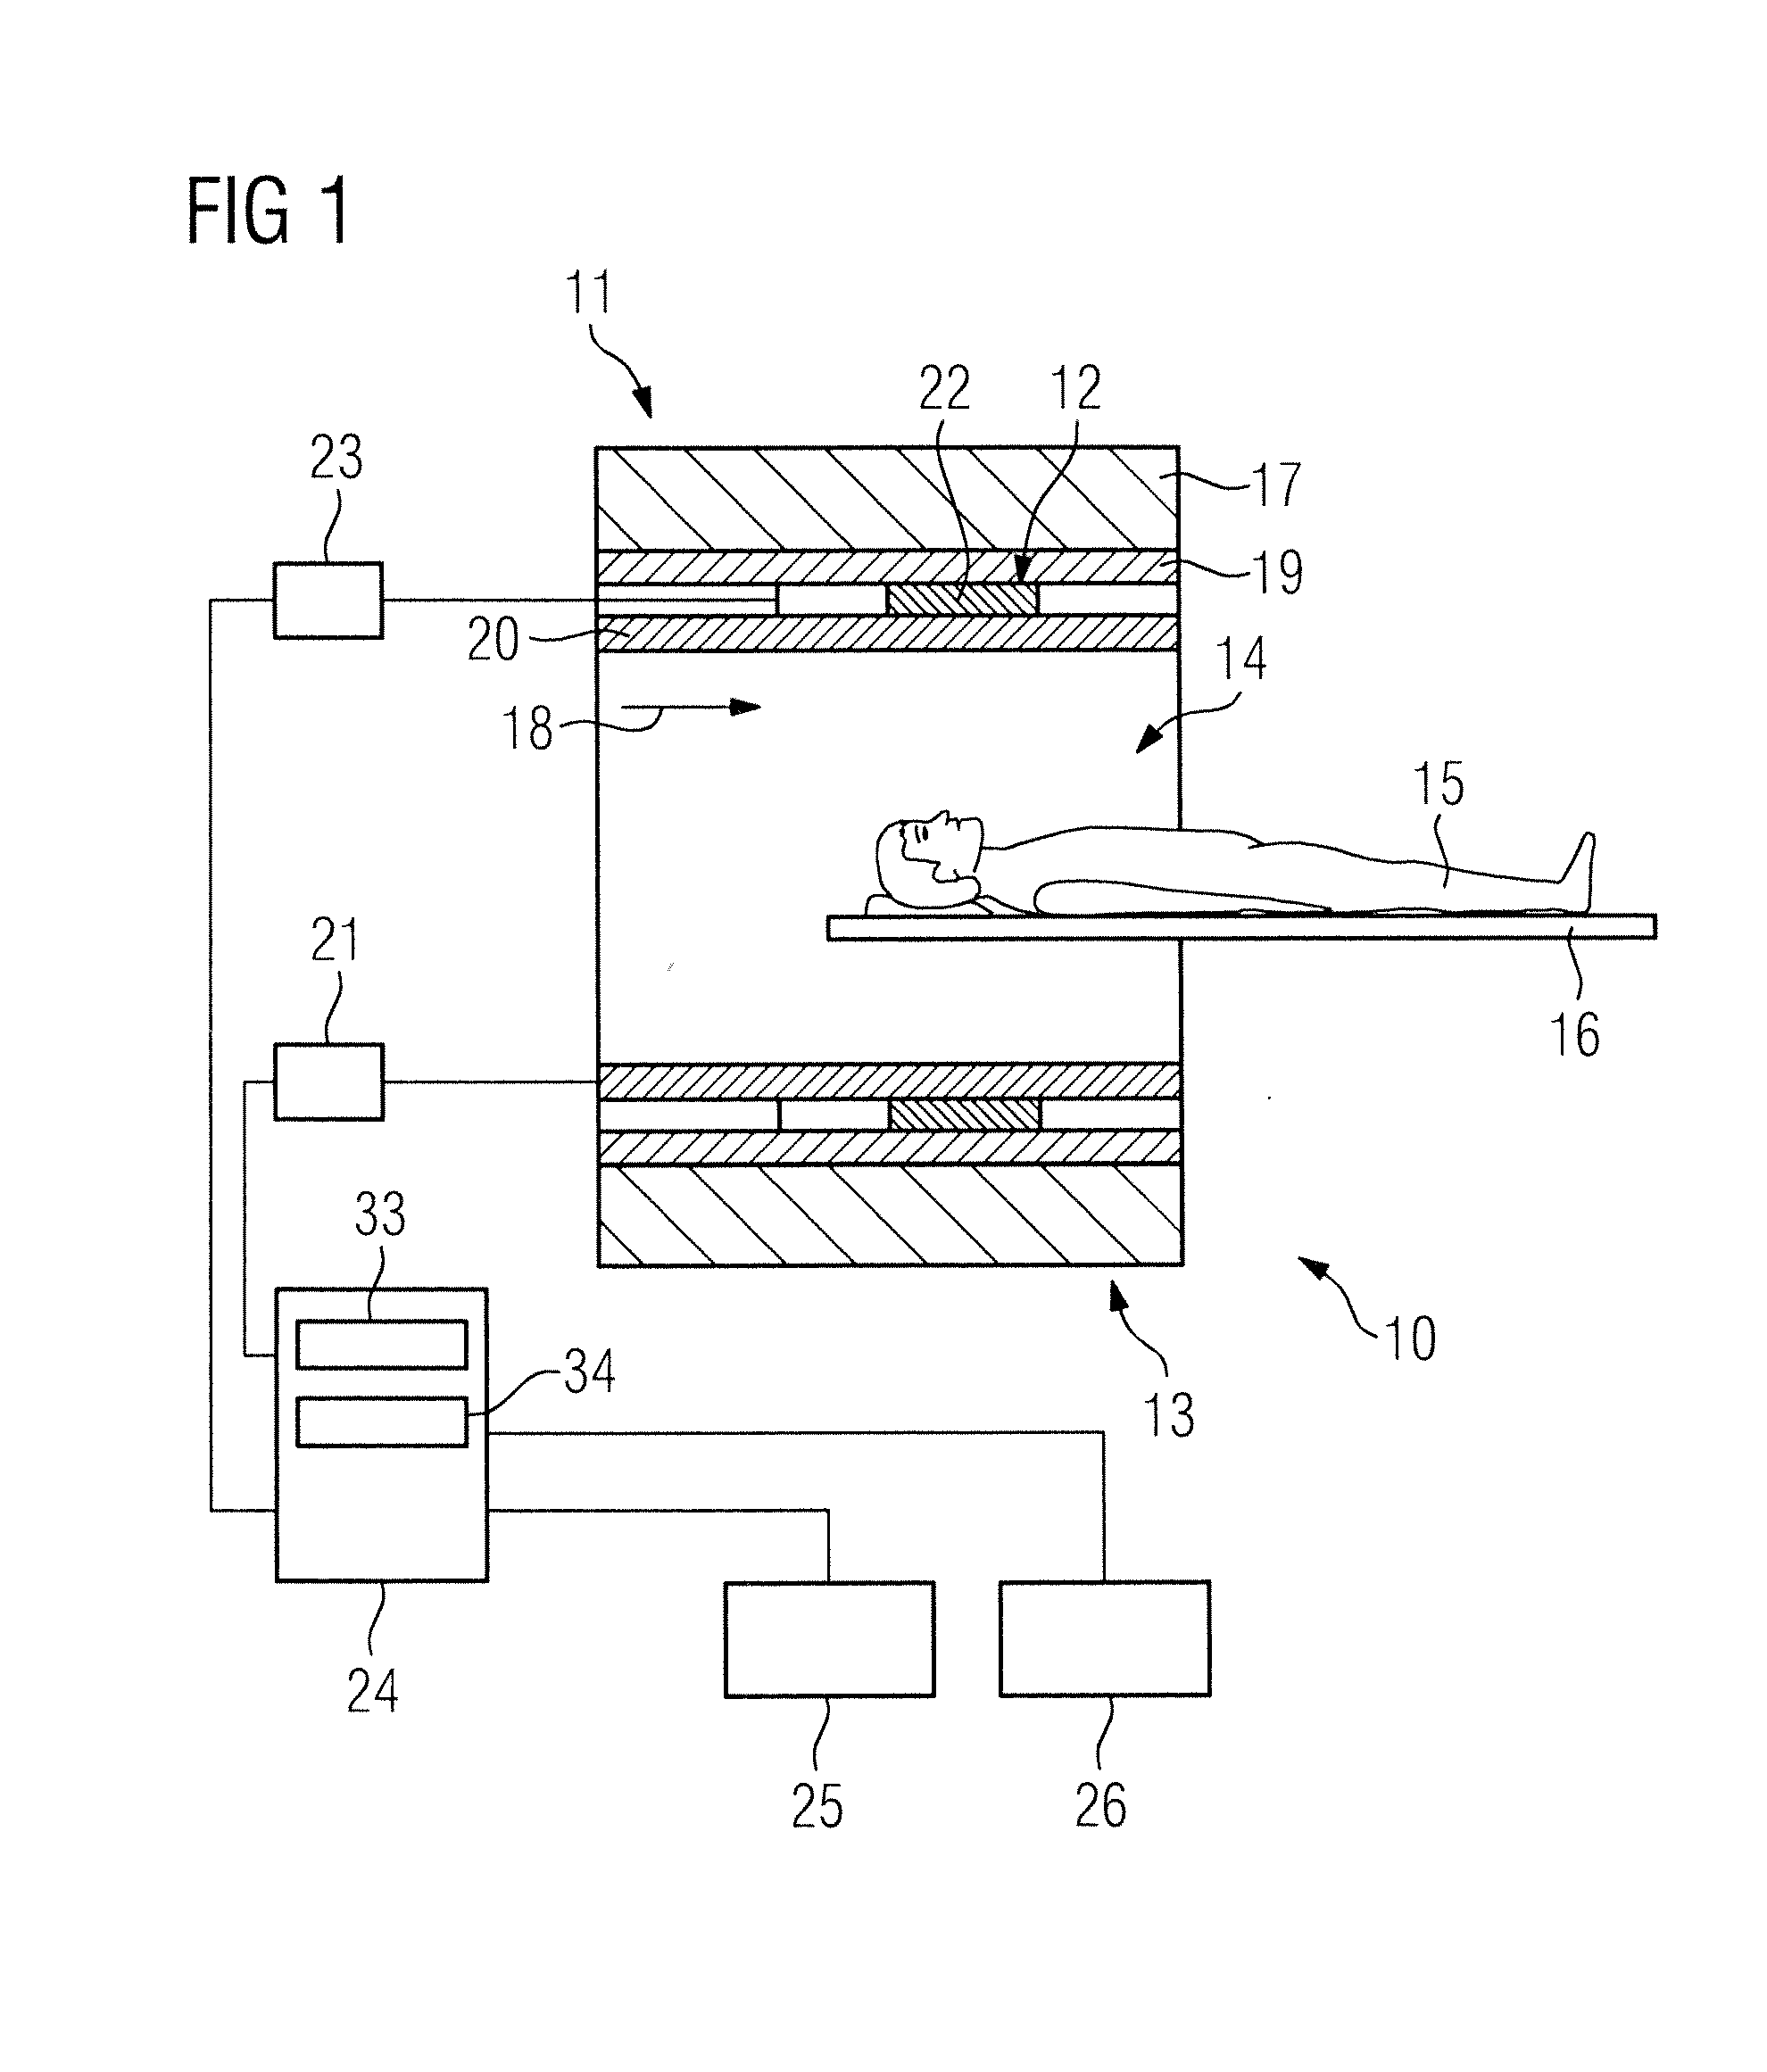 Method and apparatus for attenuation correction of emission tomography scan data